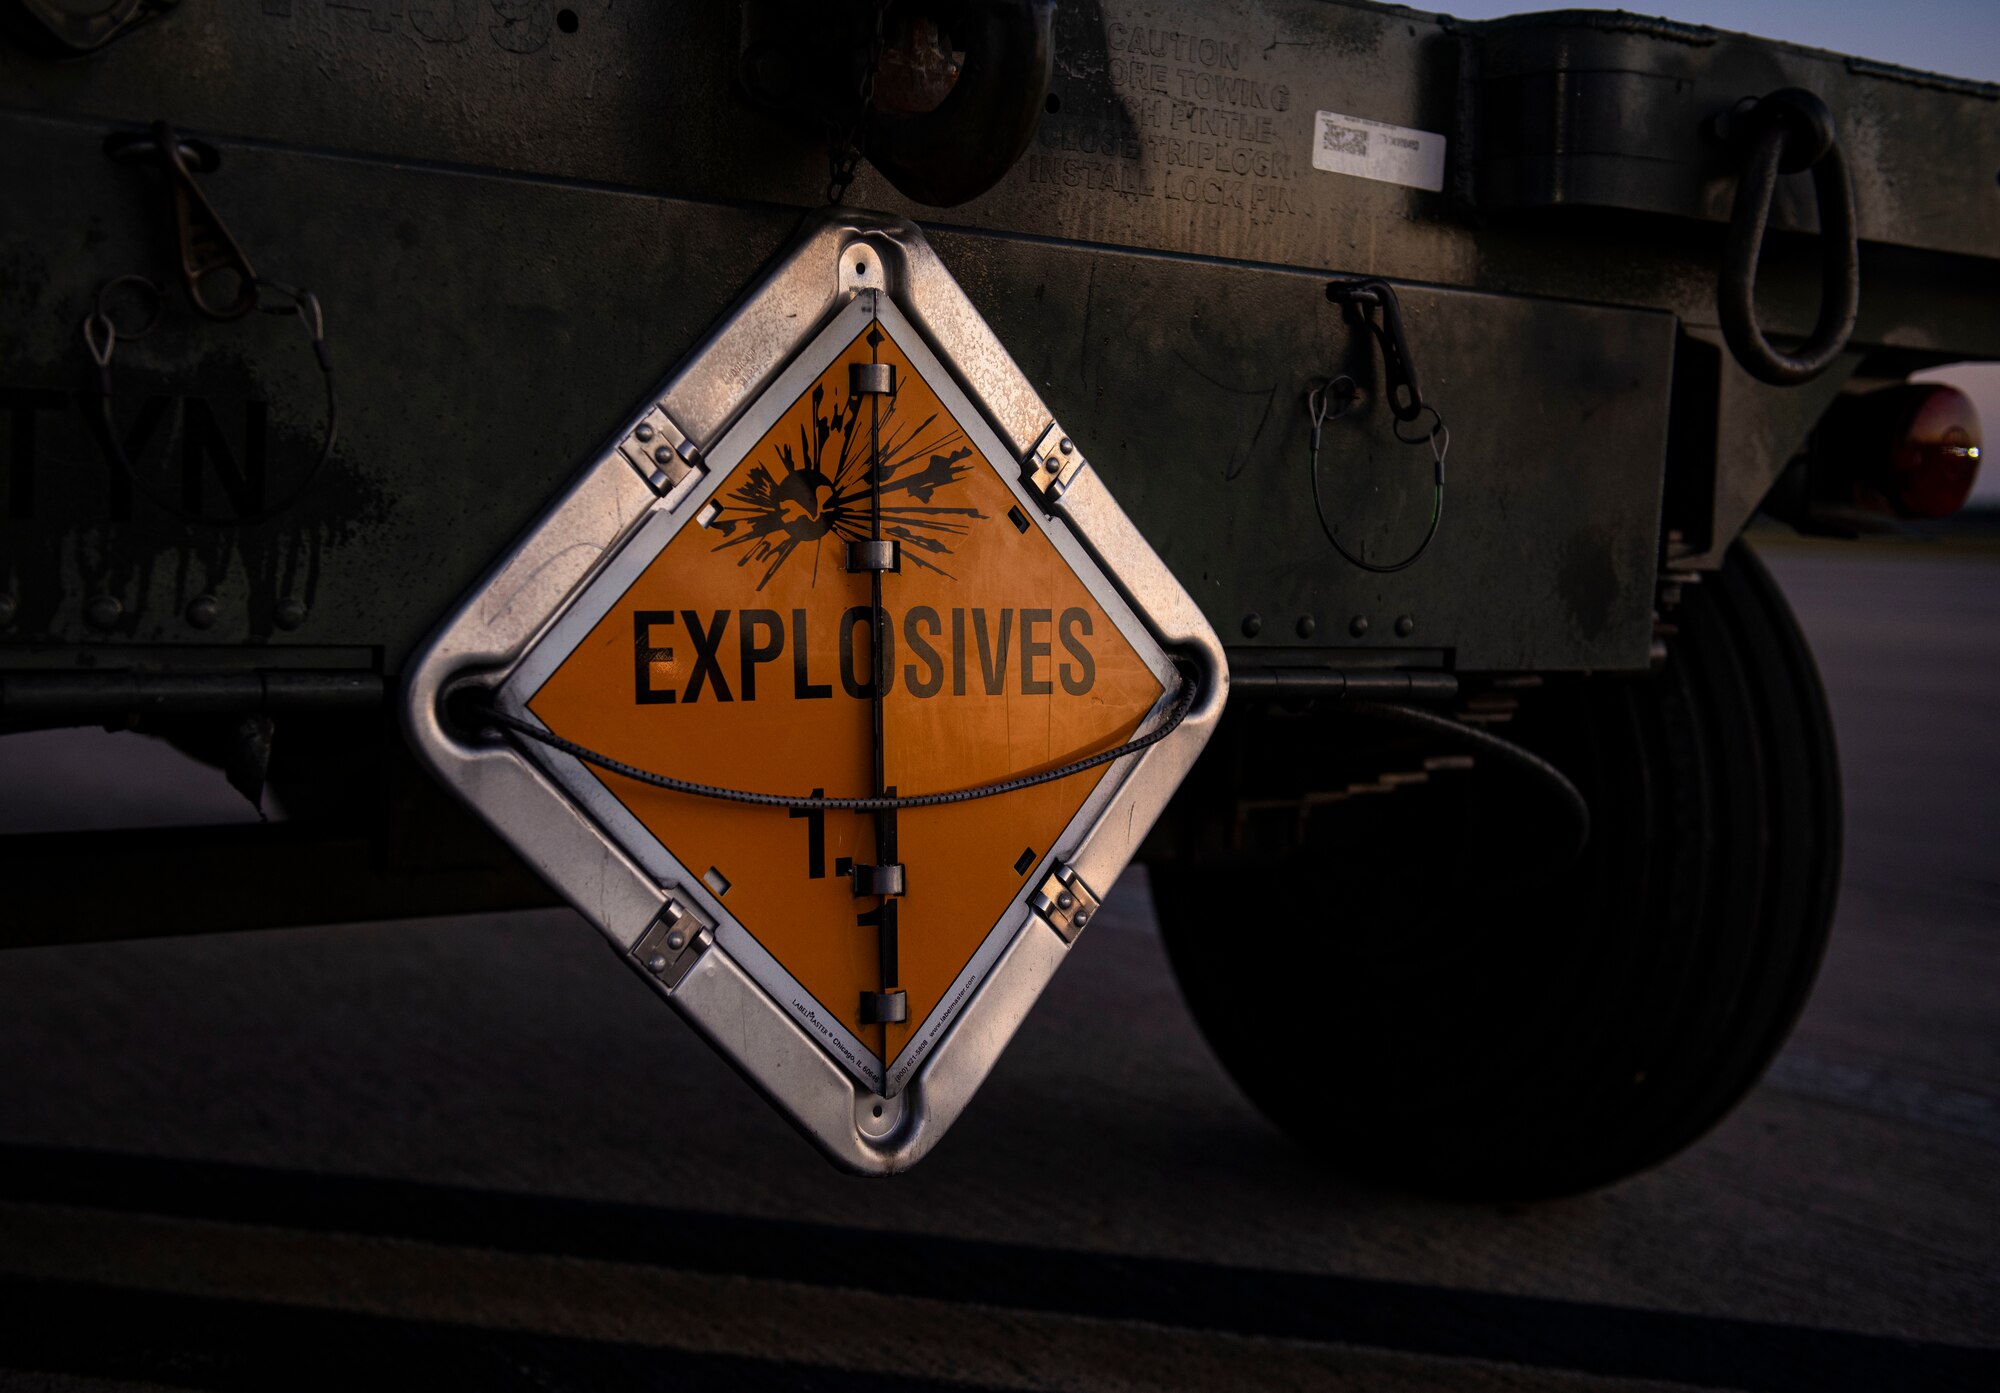 An “EXPLOSIVES” sign warns of potential hazards on the flightline during Combat Archer 19-12 on Tyndall Air Force Base, Fla., Sept. 24, 2019. Combat Archer is part of the 53rd Wing’s Weapons System Evaluation Program. (U.S. Air Force photo by Airman 1st Class Bailee A. Darbasie)